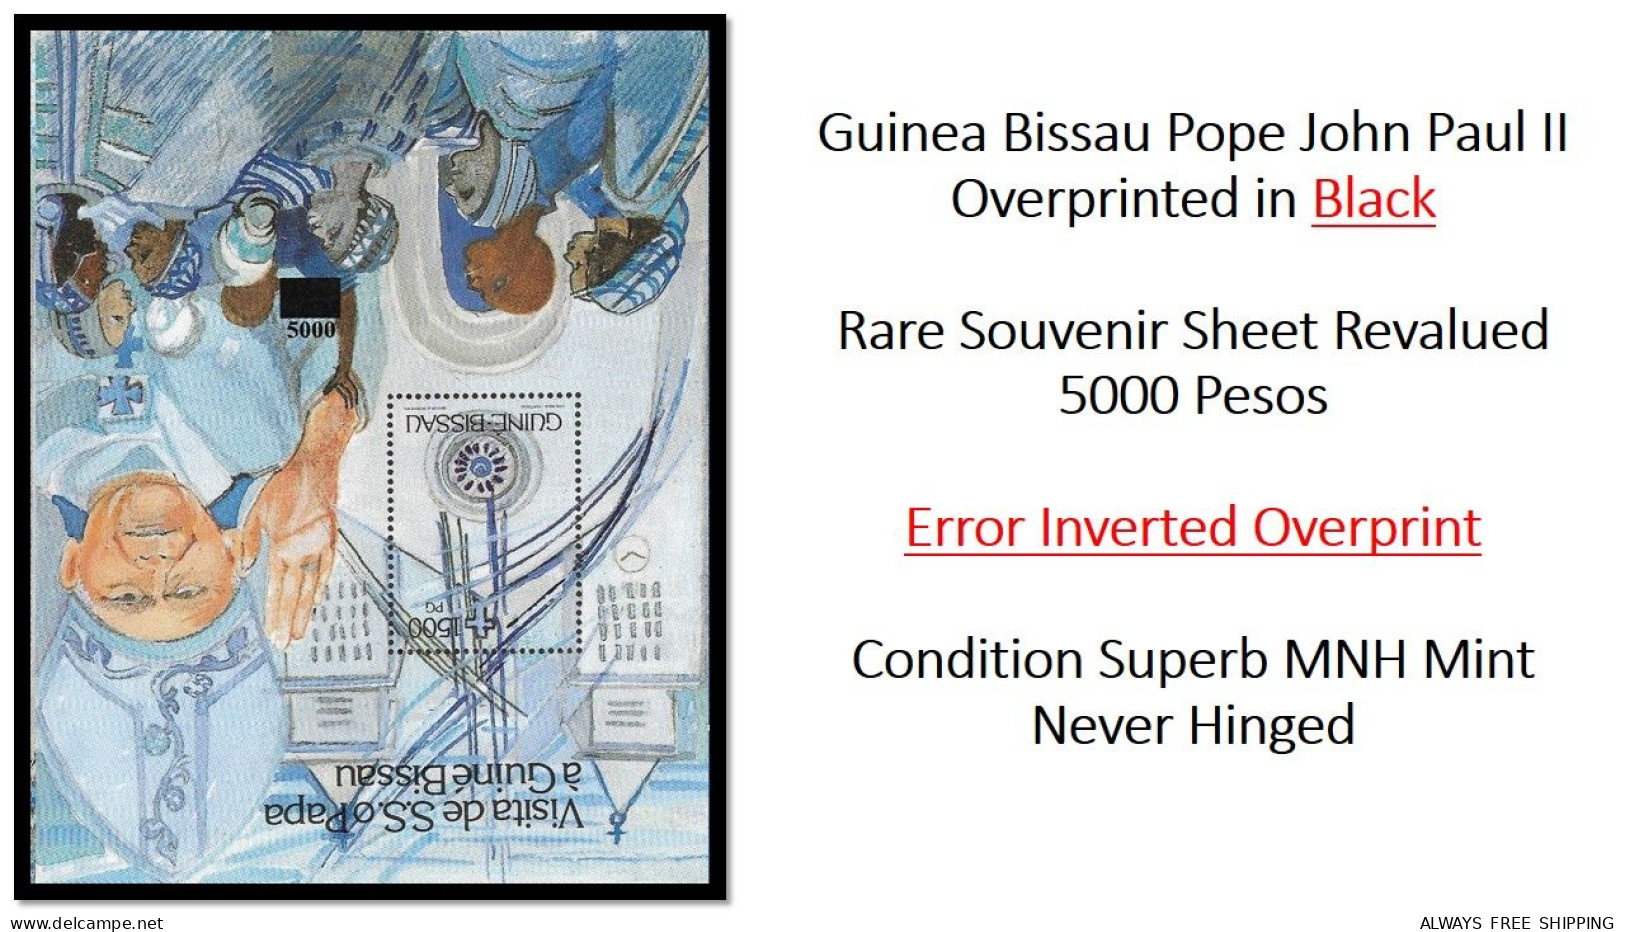 Guinea Bissau 1999 His Holiness Pope John Paul II - Error Overprint Inverted Surcharge Rare Only 5 Exist MNH - Popes